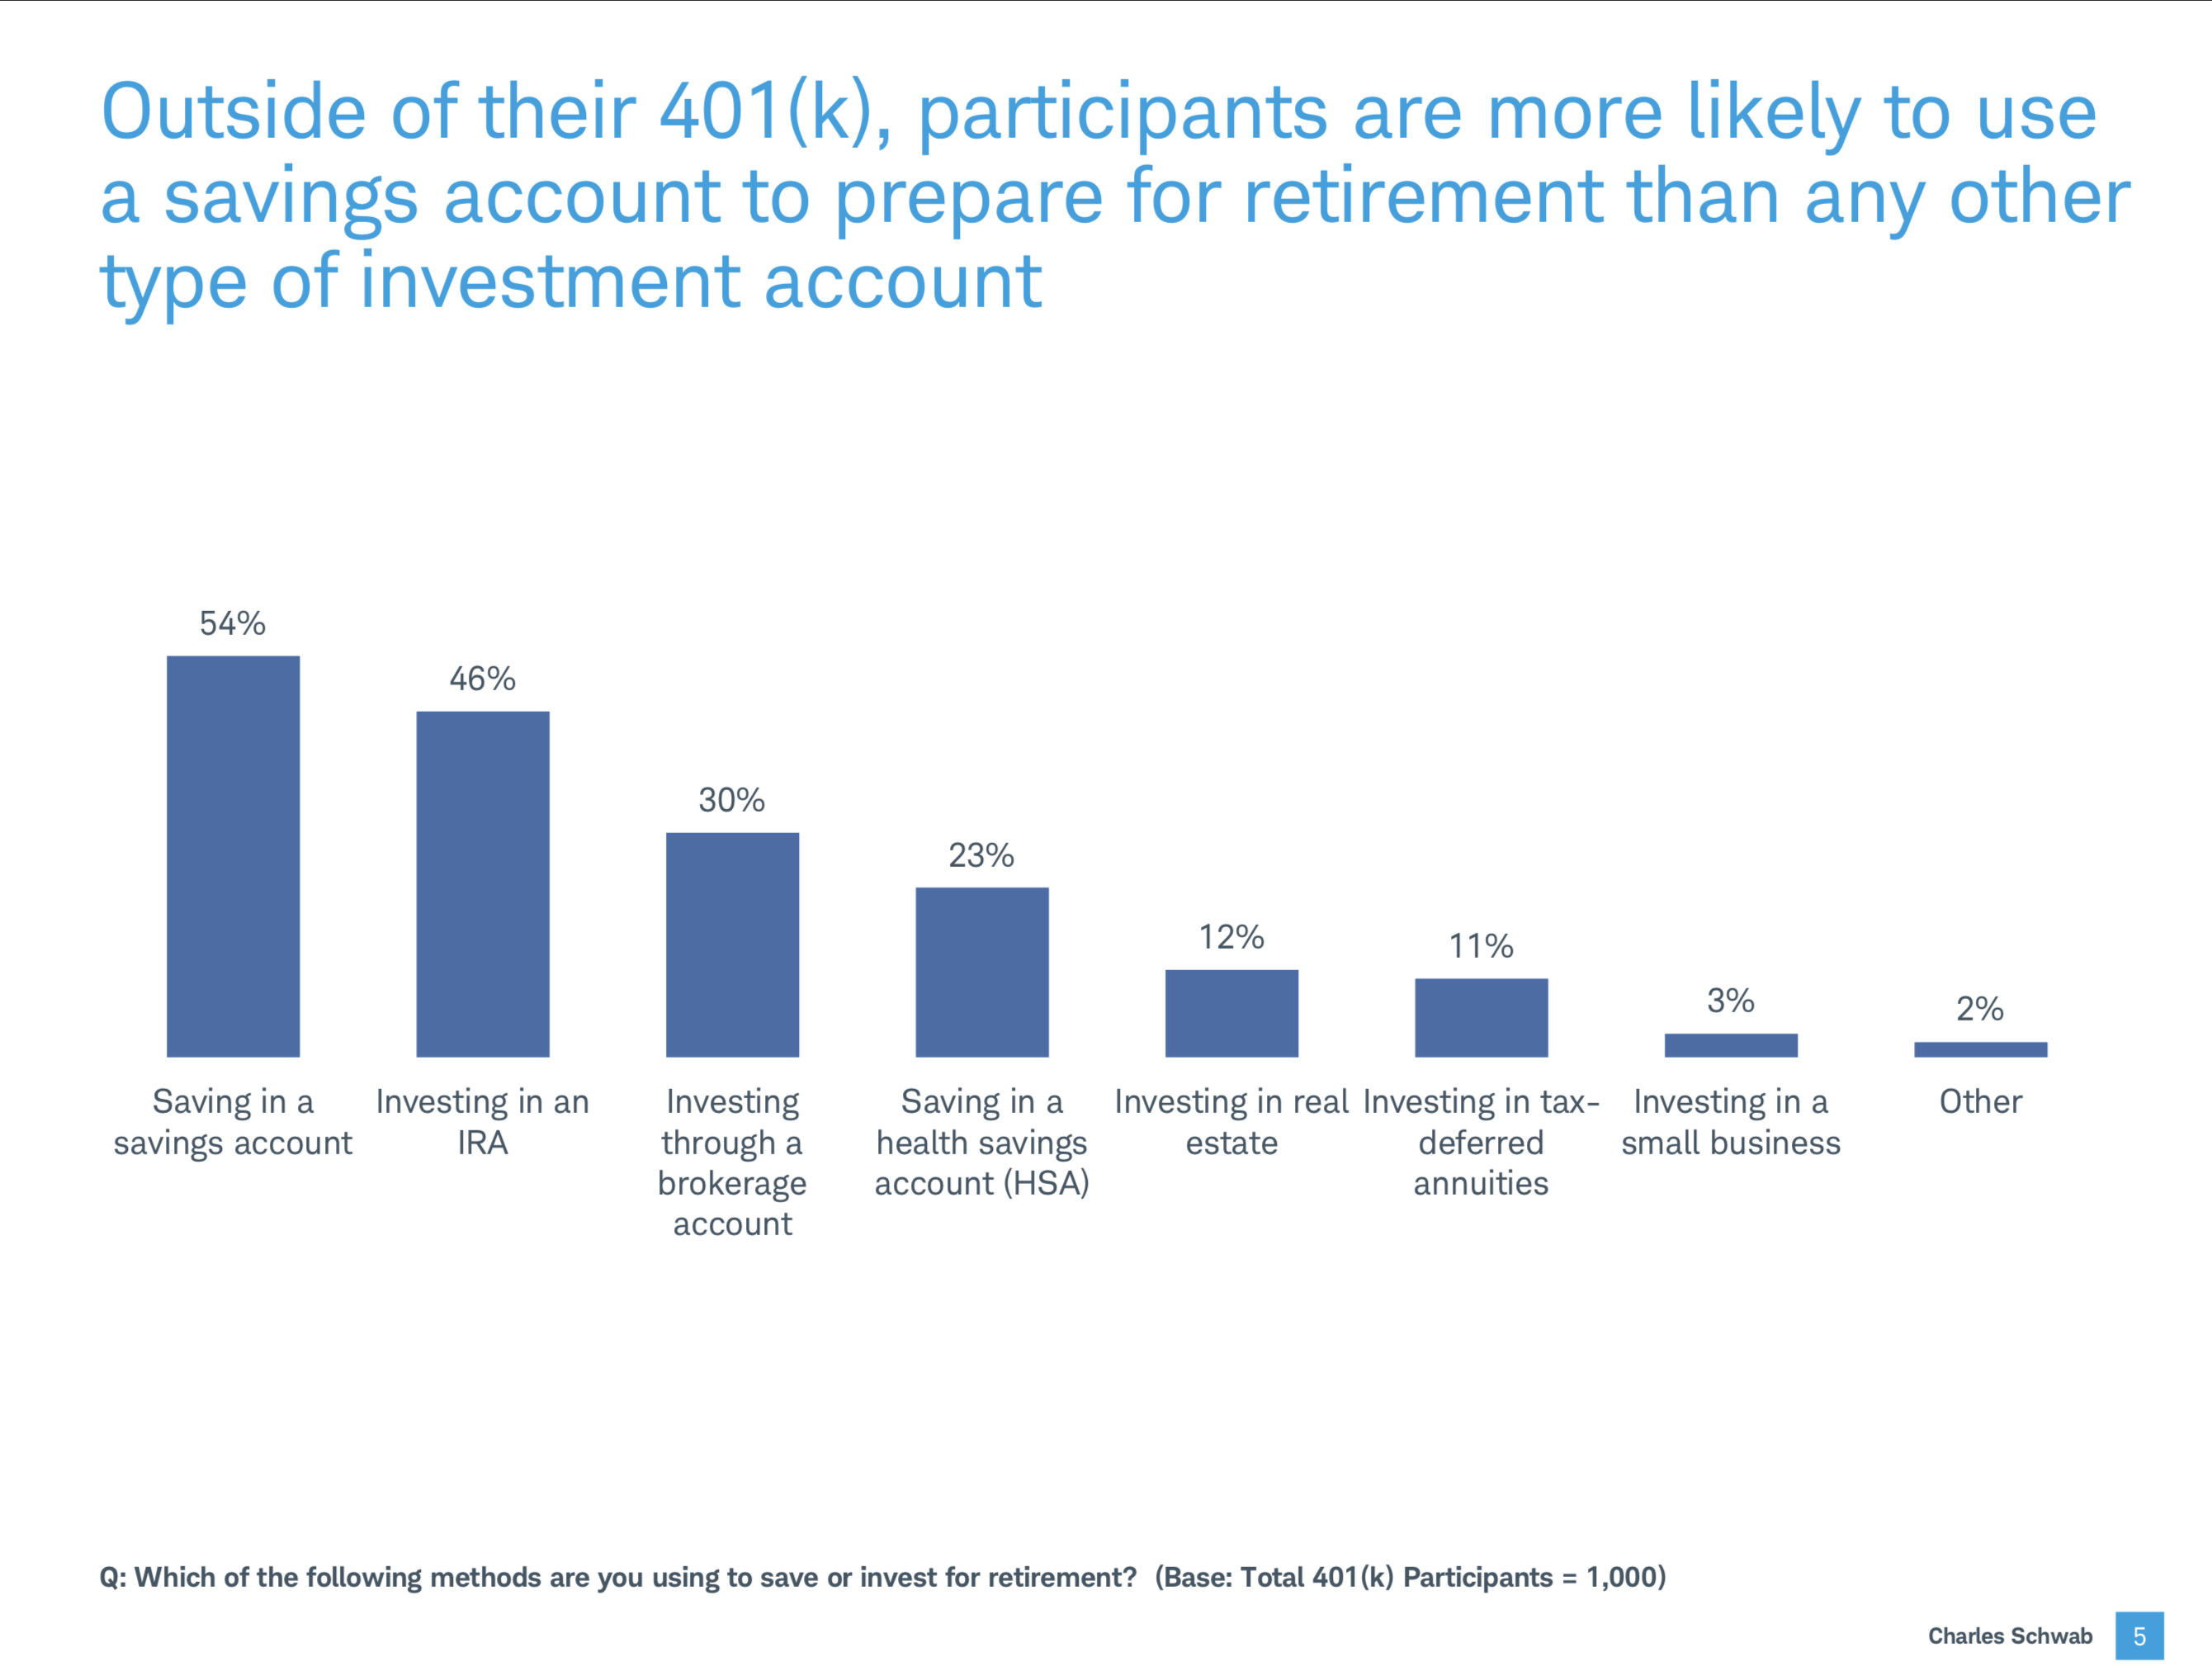 401(k) participants are more likely to use savings account than other investment accounts.